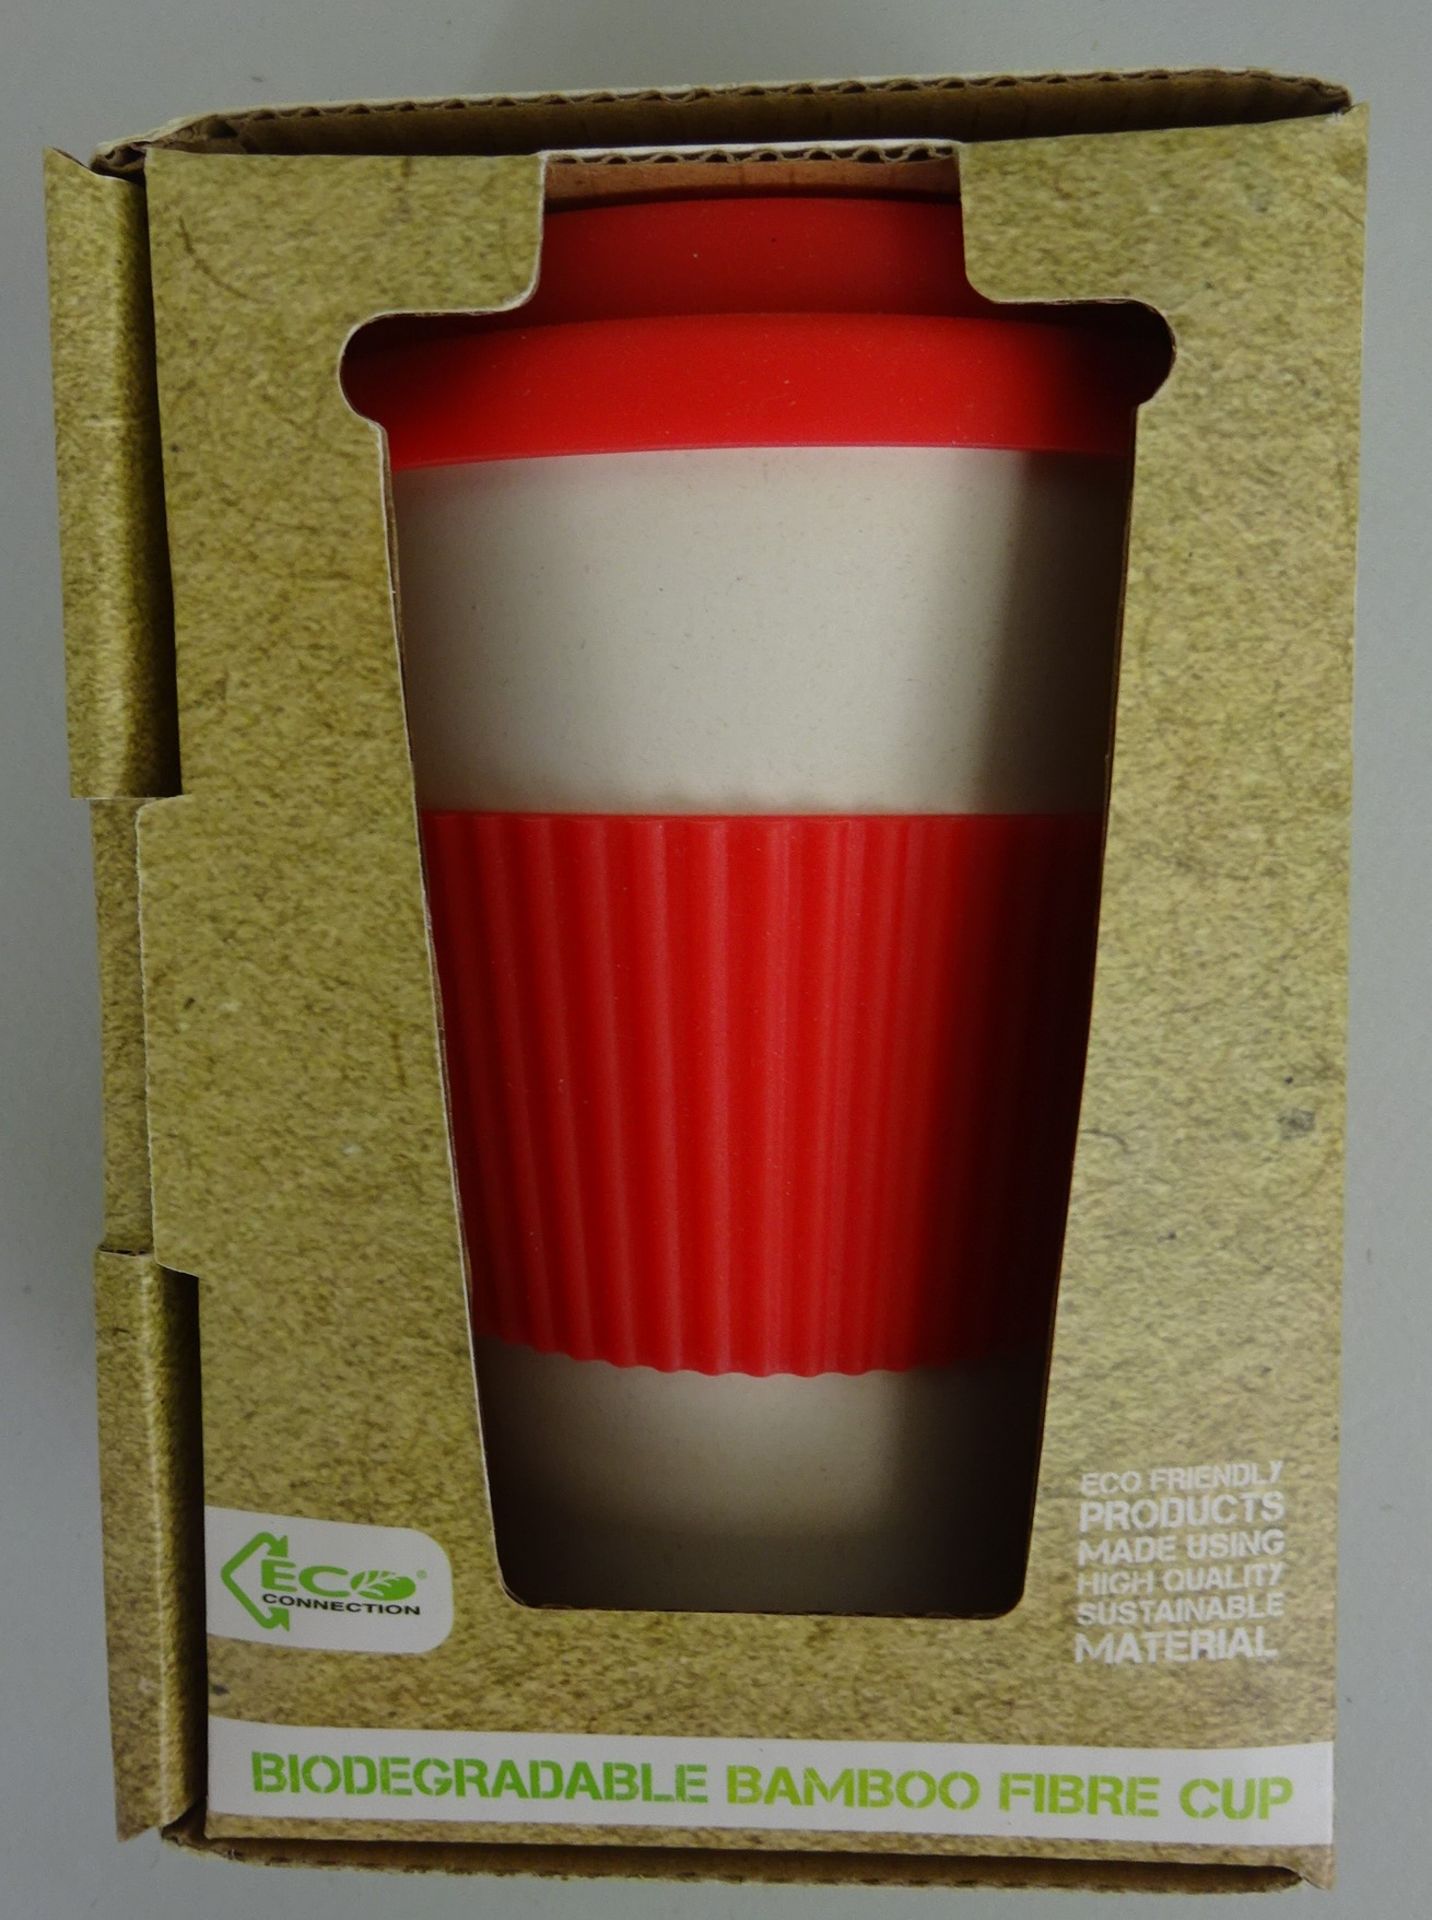 Red Biodegradable Bamboo Fibre Cup - Image 2 of 2